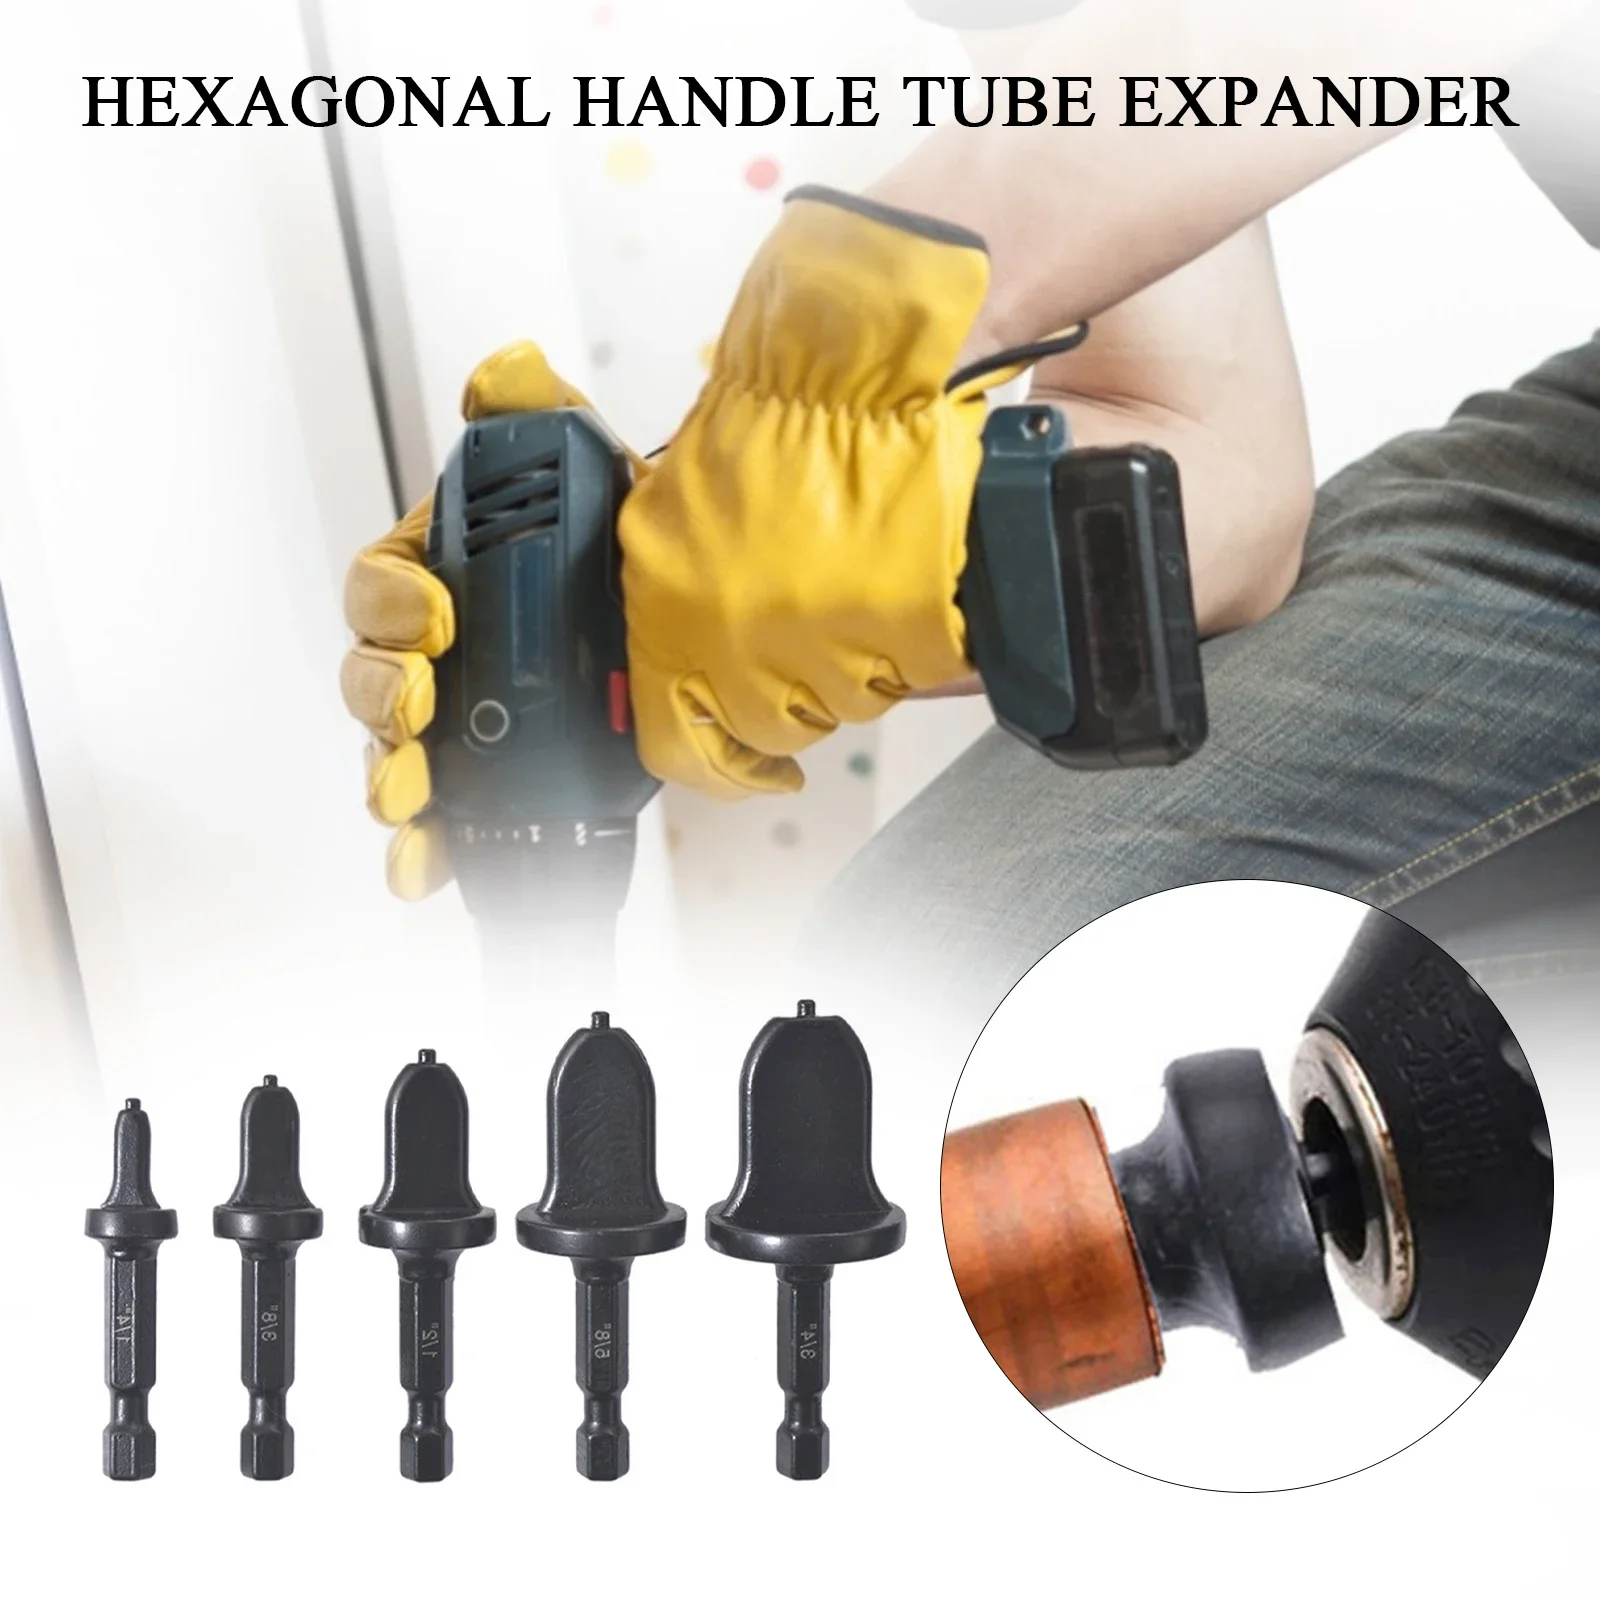 

5pcs Copper Pipe Reamer Hexagonal Handle Pipe Expander Air-conditioning Pipe Expander Tool Set1/4” 3/8” 1/2” 5/8” 3/4”